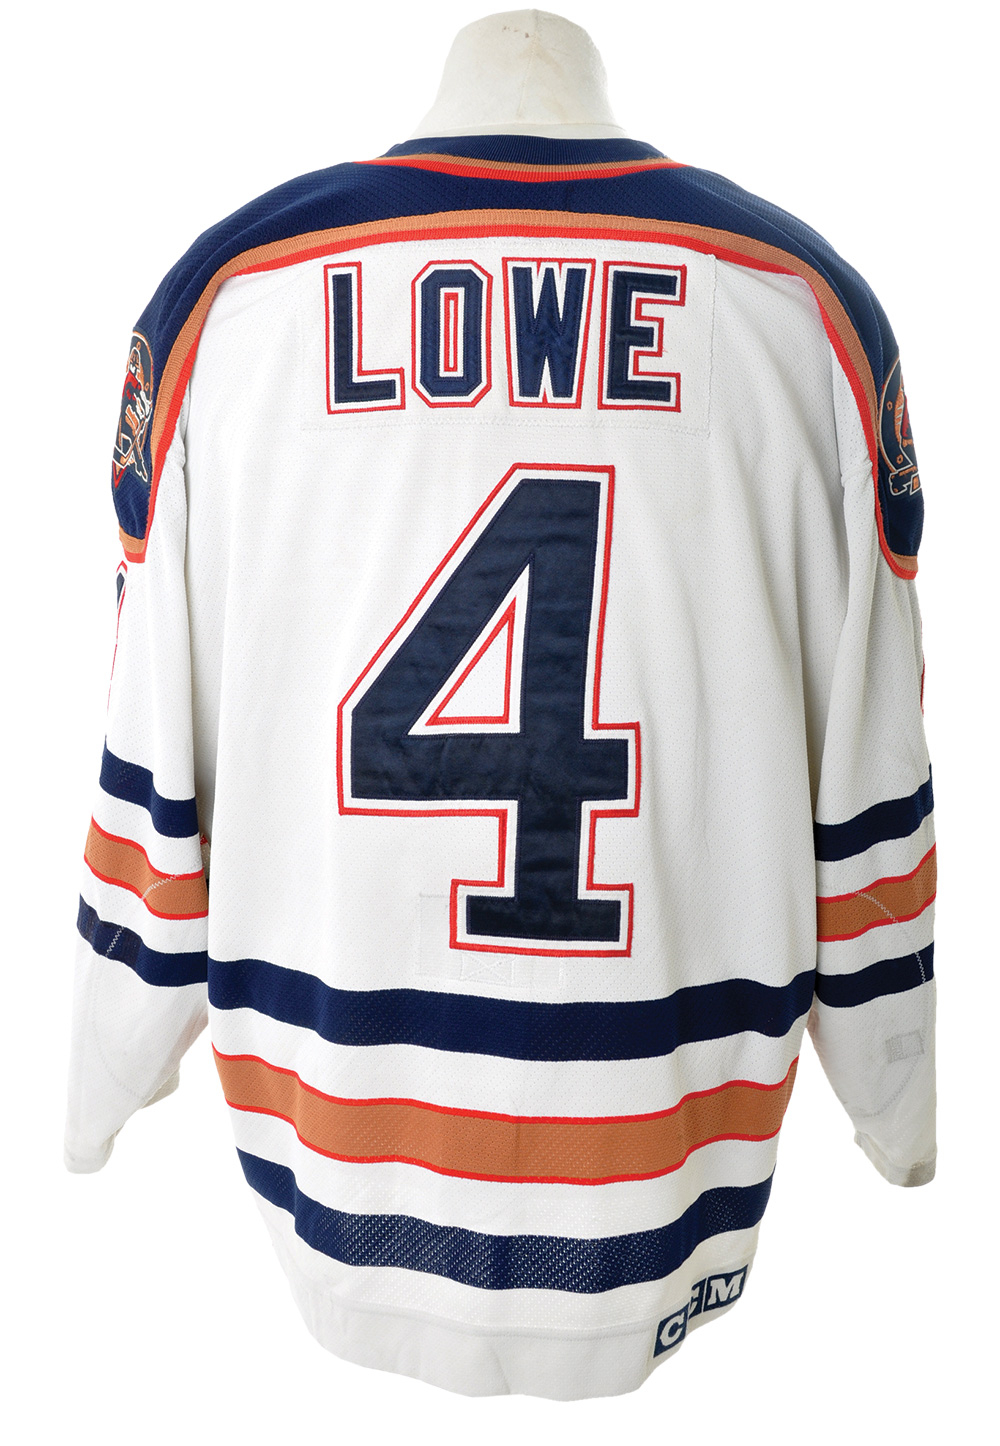 Edmonton Oilers on X: RT @ICEDistrictAuth: Celebrate @EdmontonOilers  Legend Kevin Lowe's Jersey Number Retirement with Limited Edition  merchandise! Check out th… / X